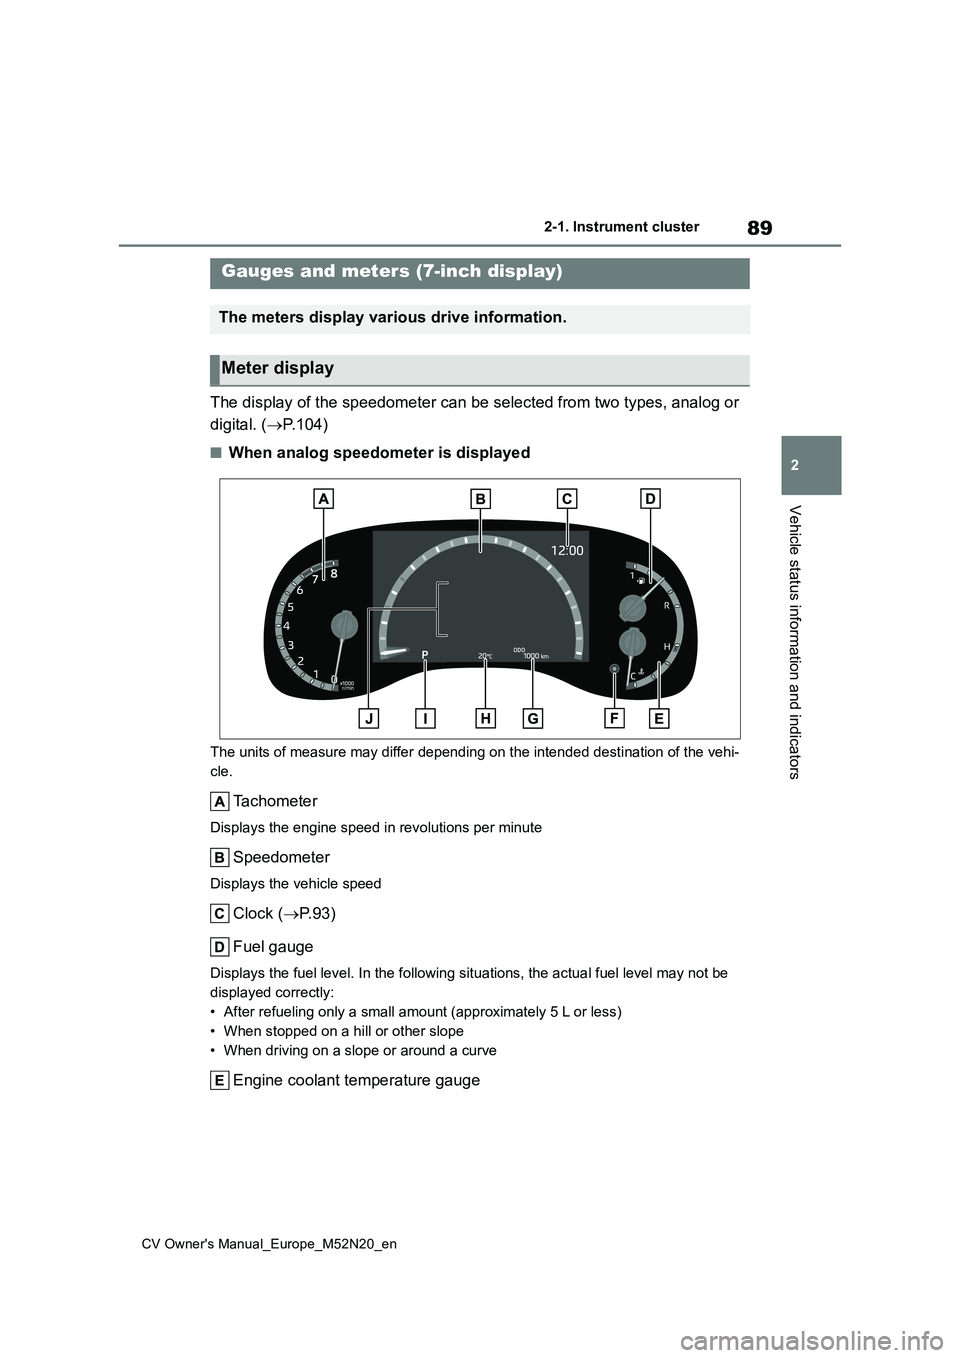 TOYOTA YARIS CROSS 2022  Owners Manual 89
2
CV Owner's Manual_Europe_M52N20_en
2-1. Instrument cluster
Vehicle status information and indicators
The display of the speedometer can be selected from two types, analog or  
digital. ( P